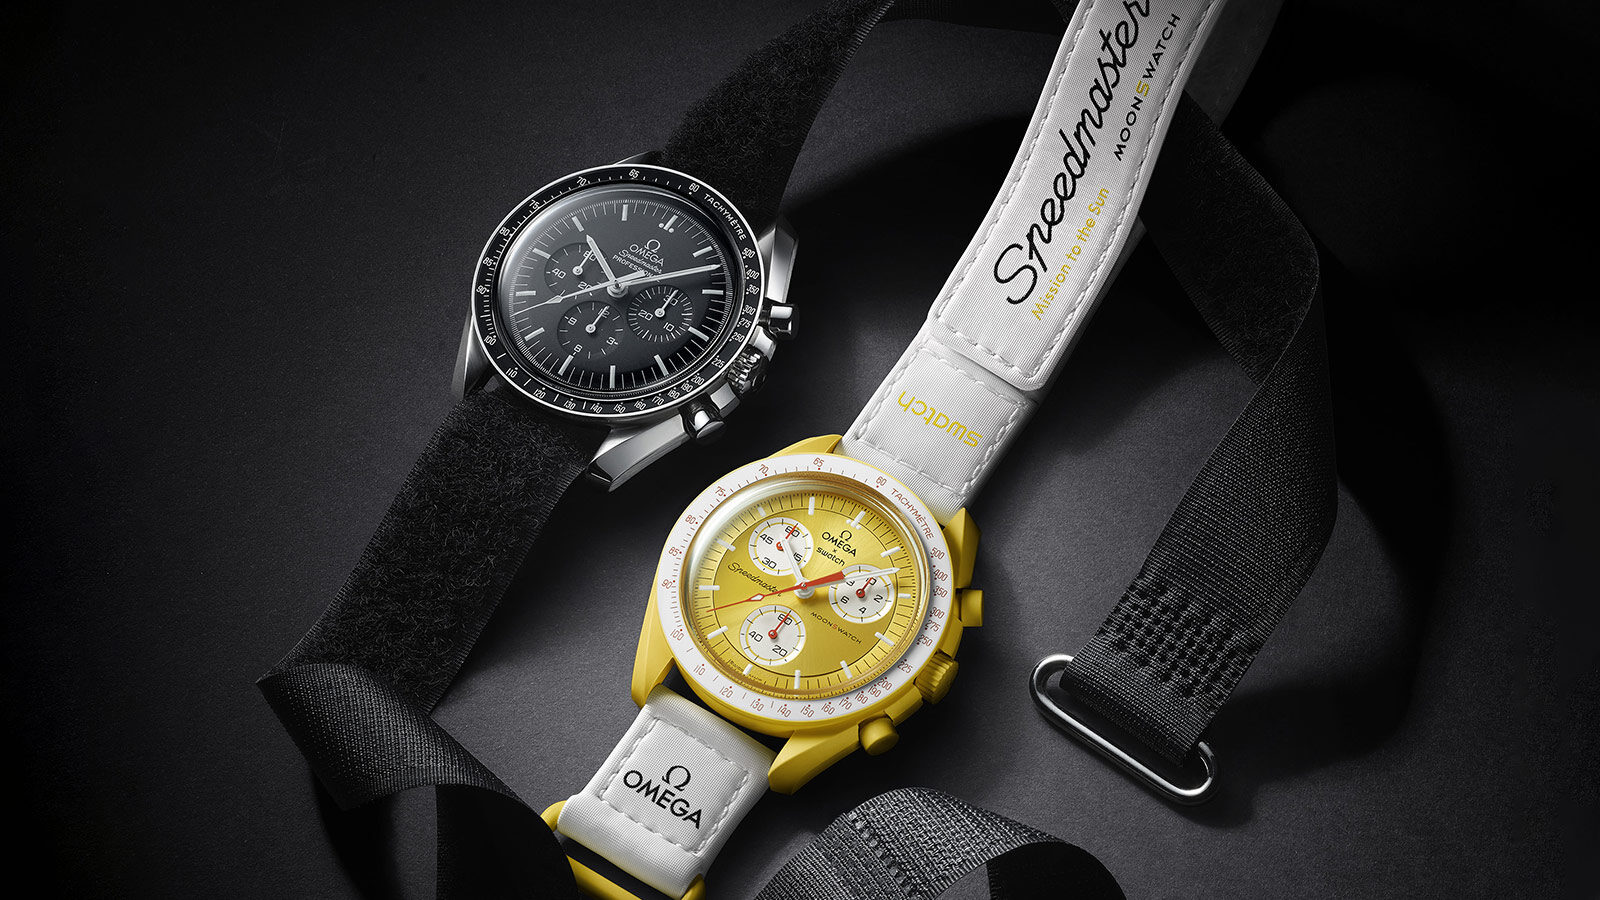 SWATCH SALUTES ONE OF THE MOST ICONIC WATCHES OF THE SWISS WATCH